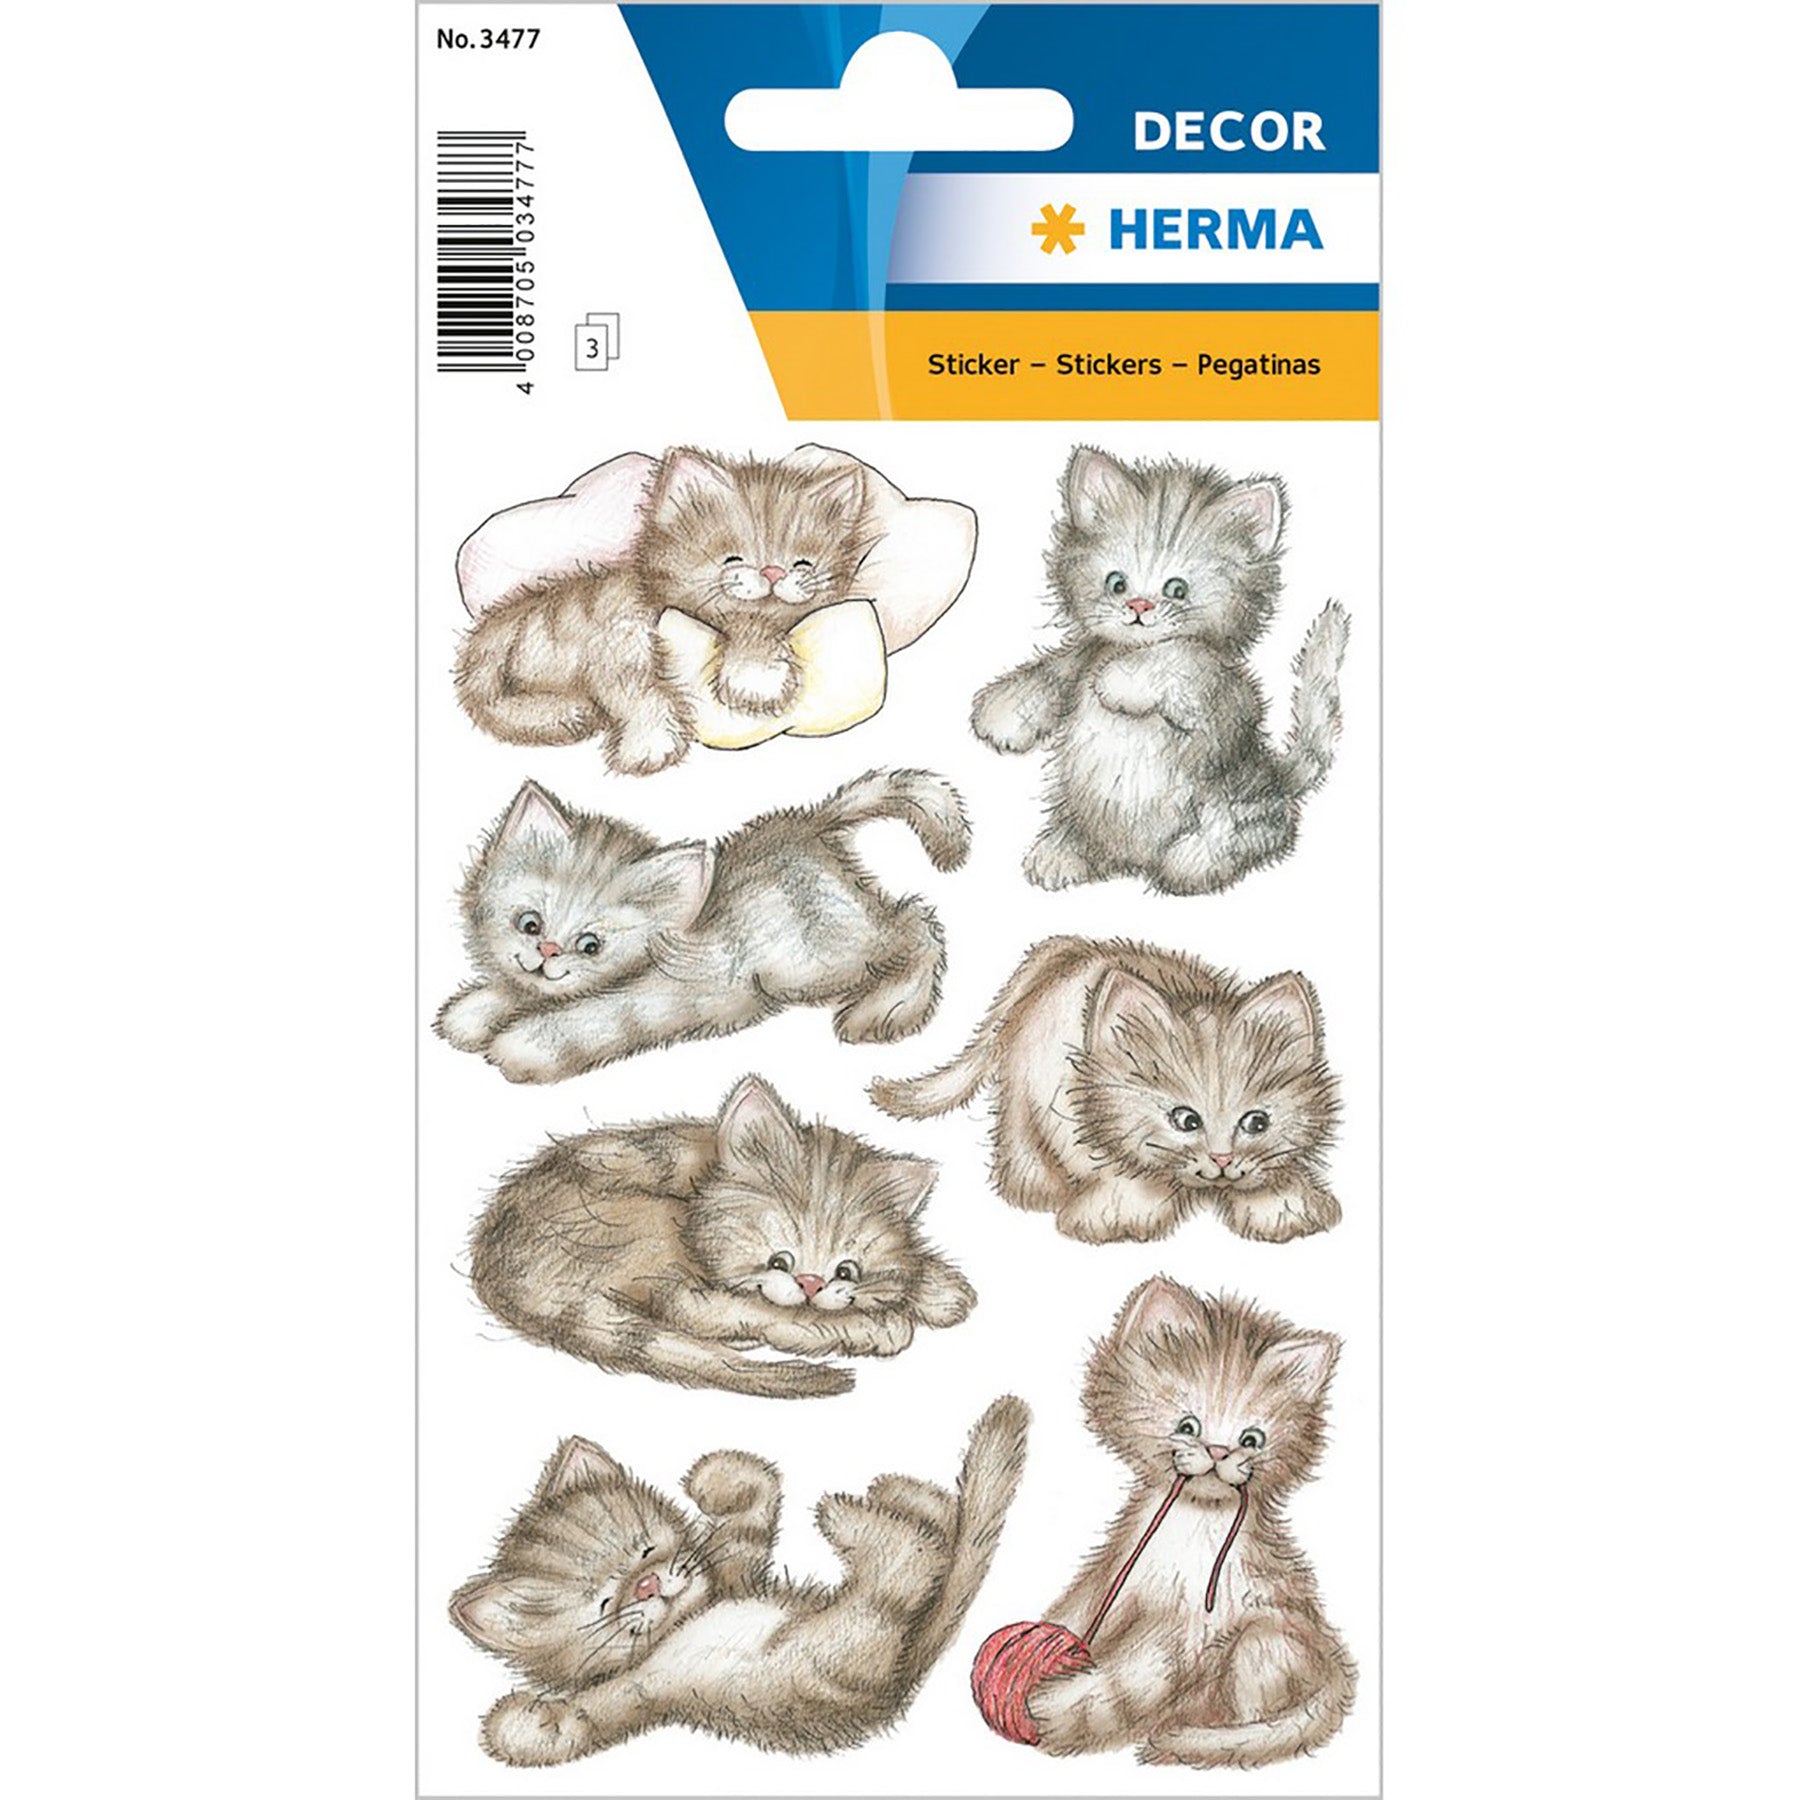 Herma Decor 3 Sheets Stickers Sweet Cats 4.75x3.1in Sheet